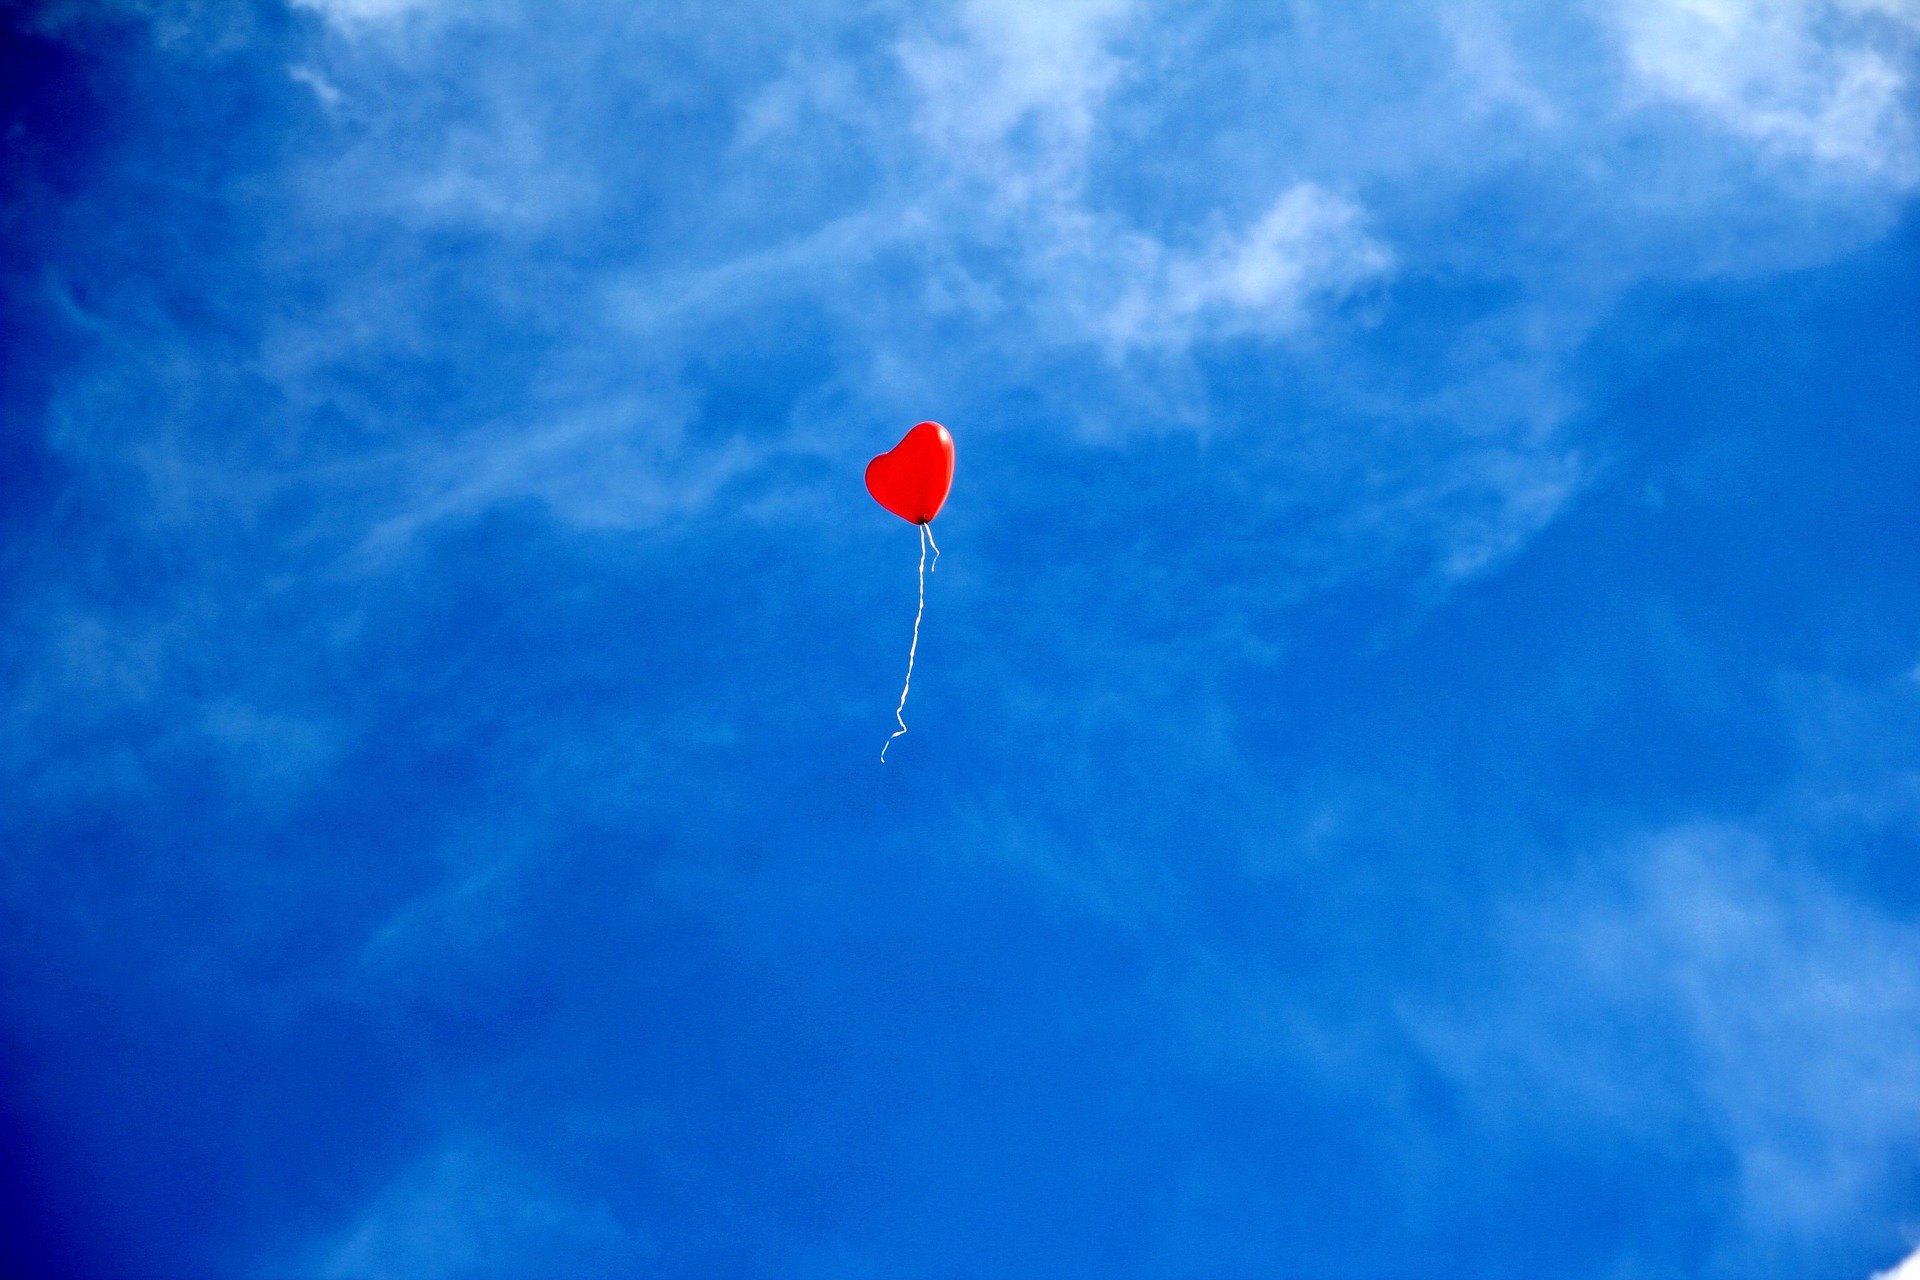 Heart shaped red balloon high in the sky with a white string hanging down. The sky is a vibrant blue with whispy clouds around.